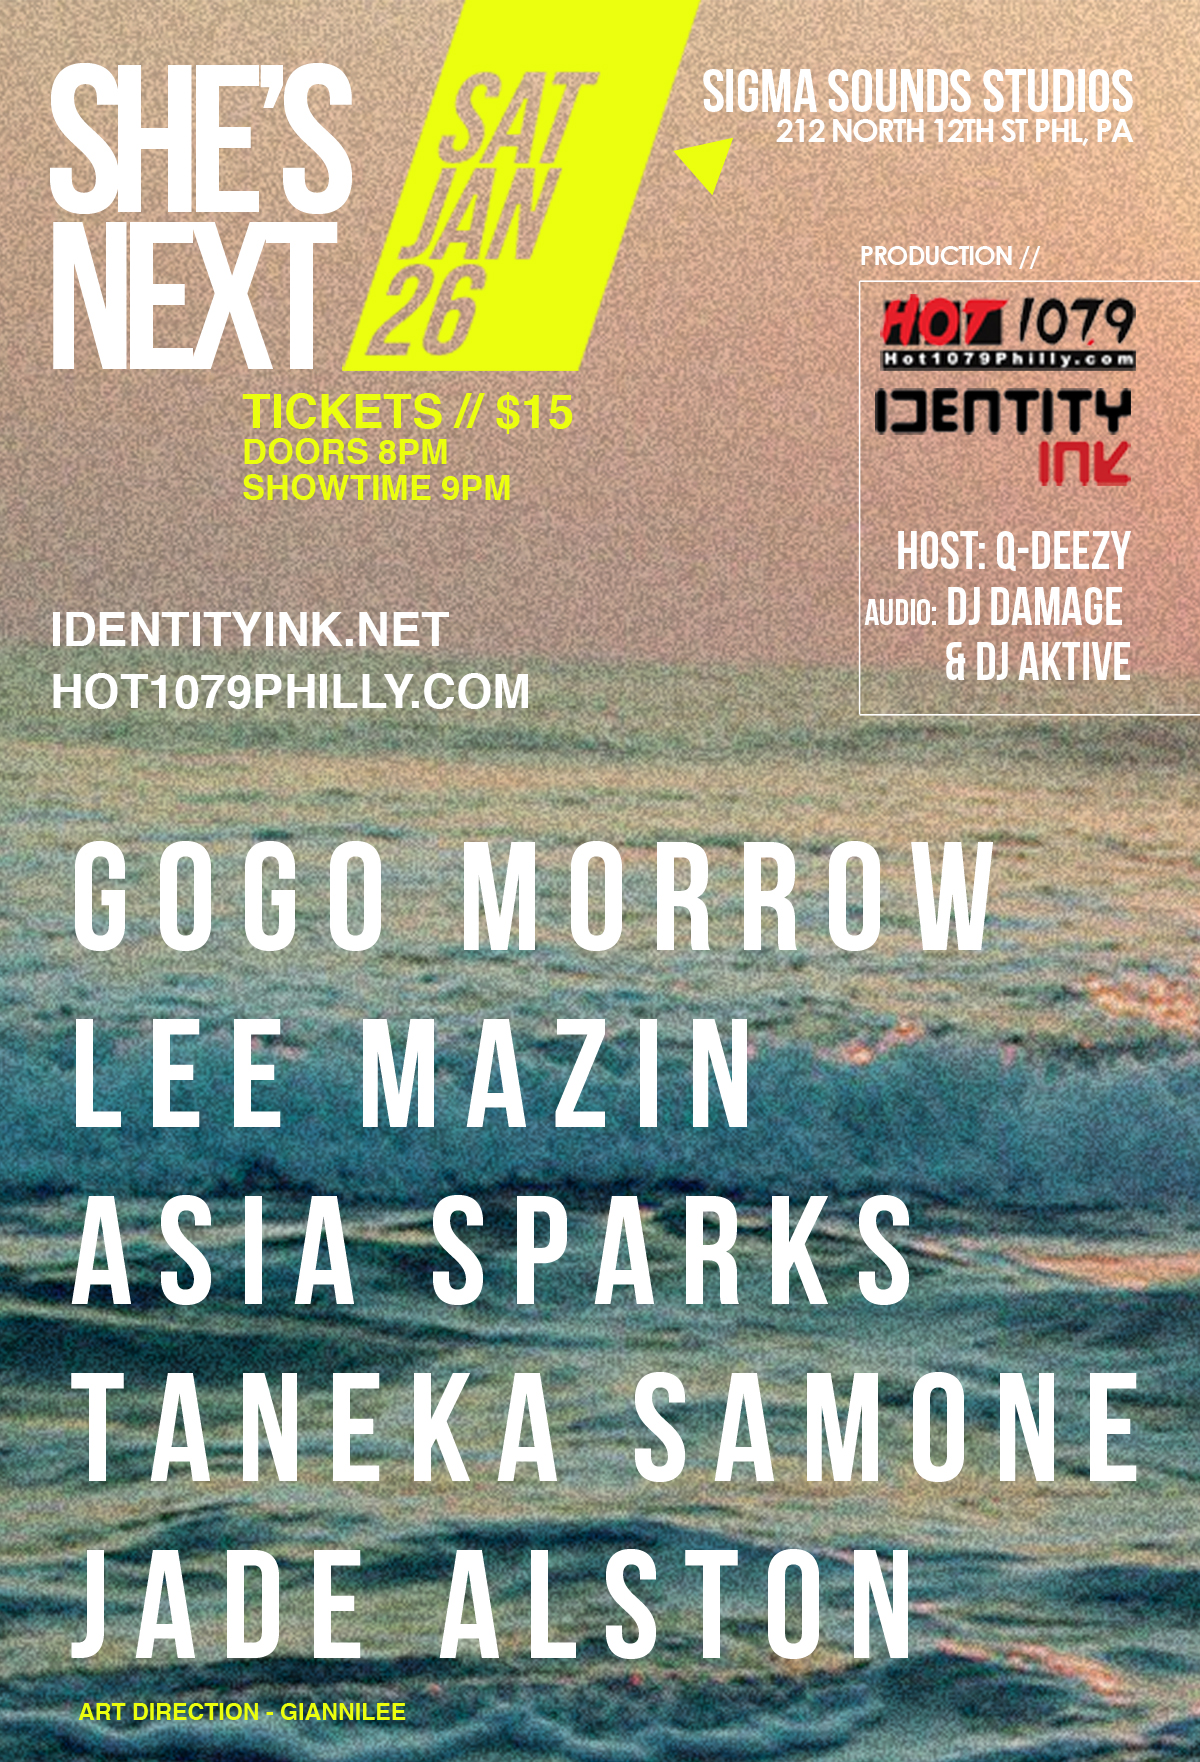 hot-107-9s-shes-next-concert-on-january-26-2013-more-details-inside-HHS1987-1 Win Tickets To Hot 107.9′s She’s Next Concert on January 26, 2013  